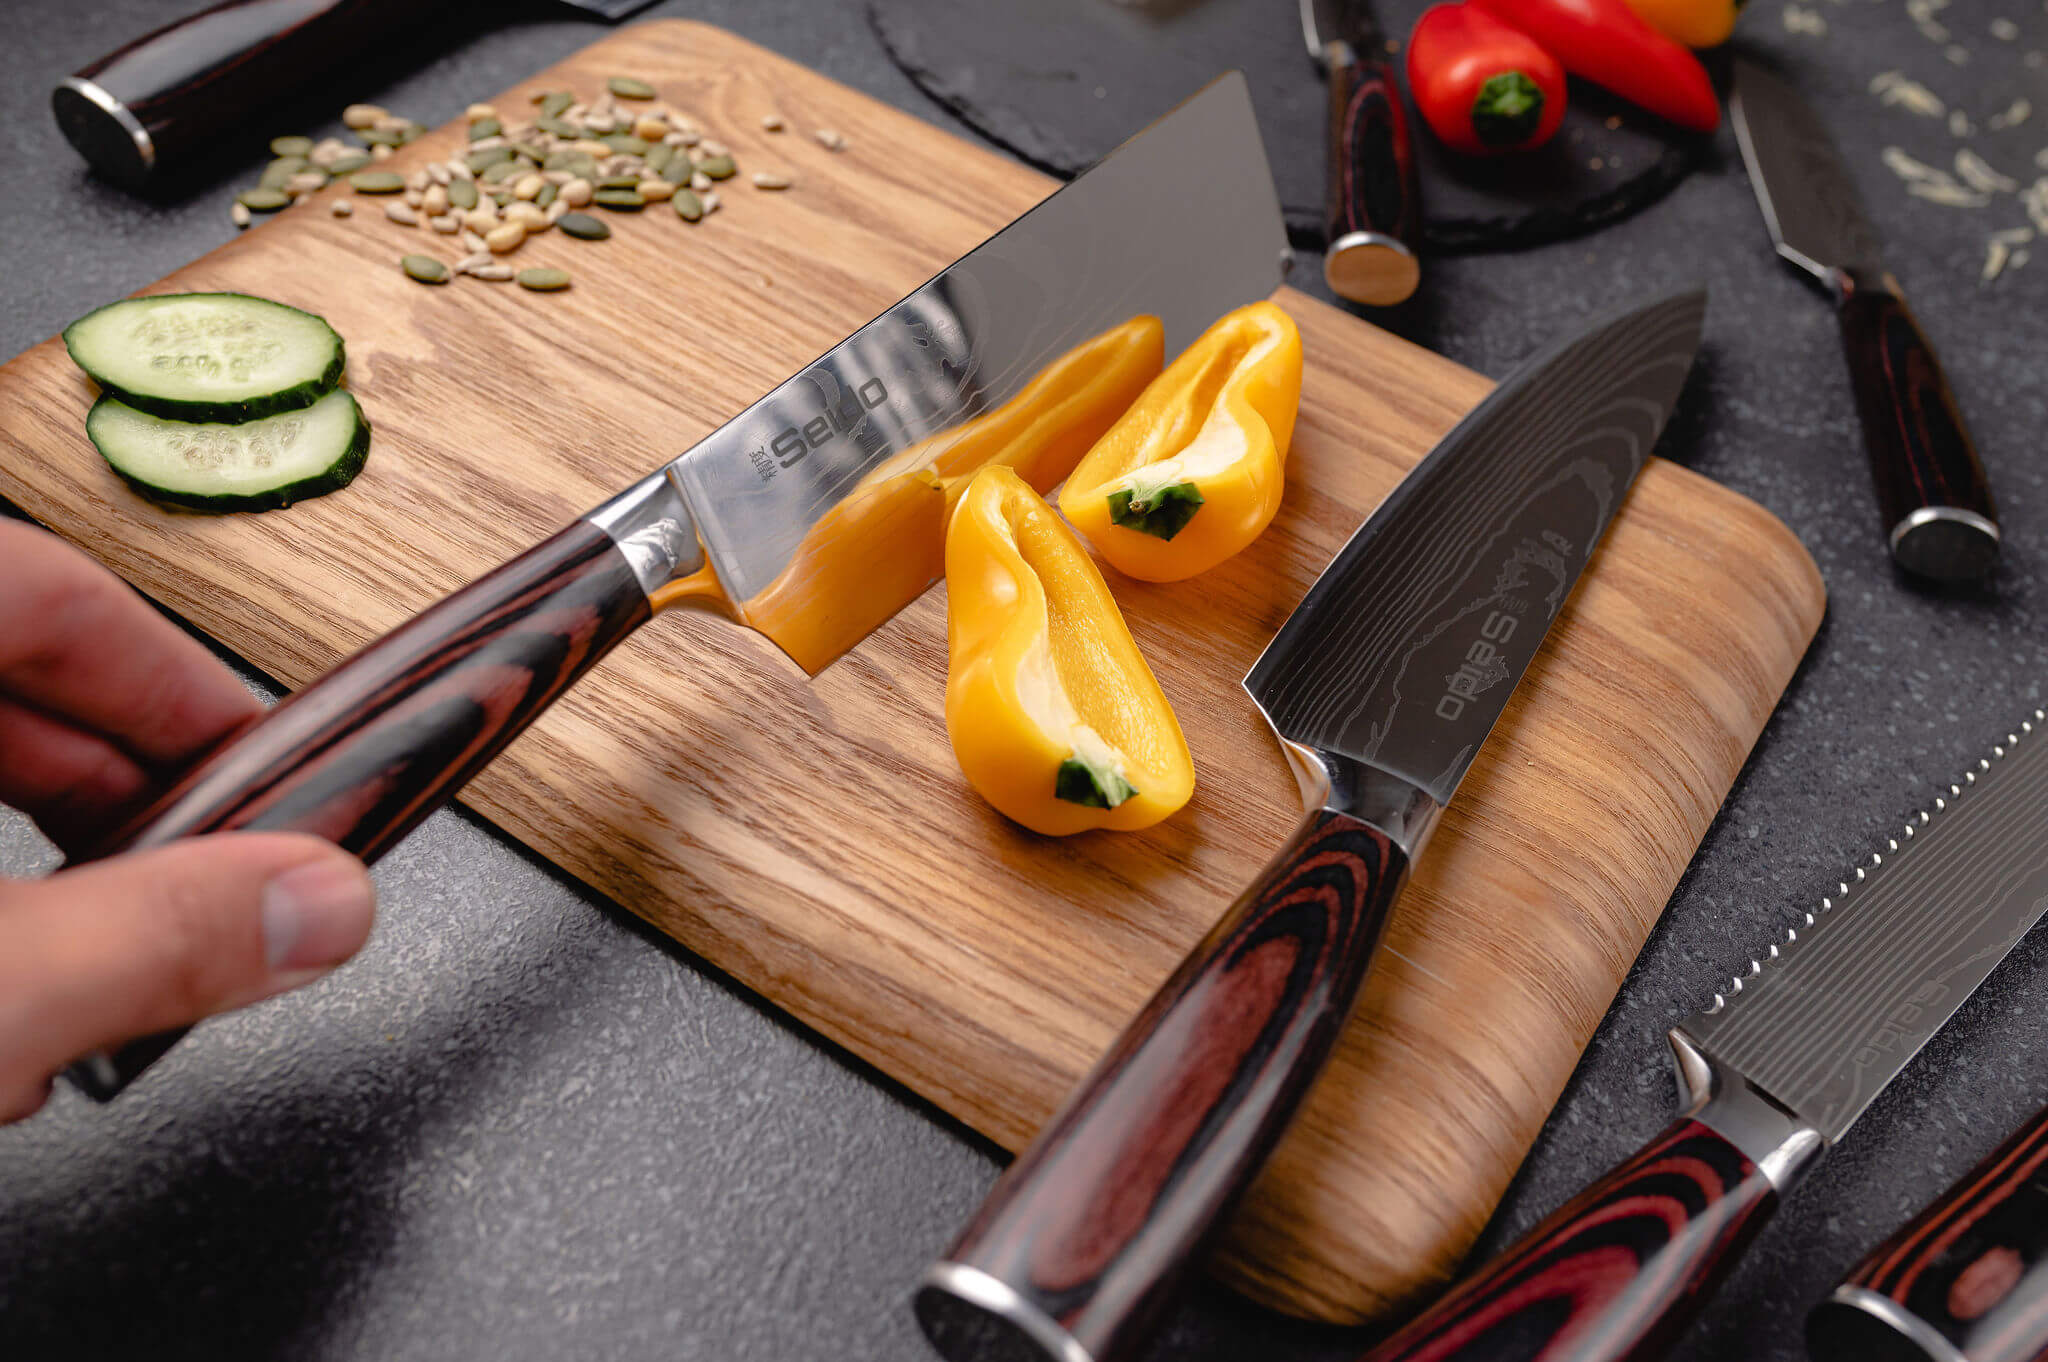 The shimmering blade of a knife by Seido Knives, firmly gripped by someone cutting vegetables.